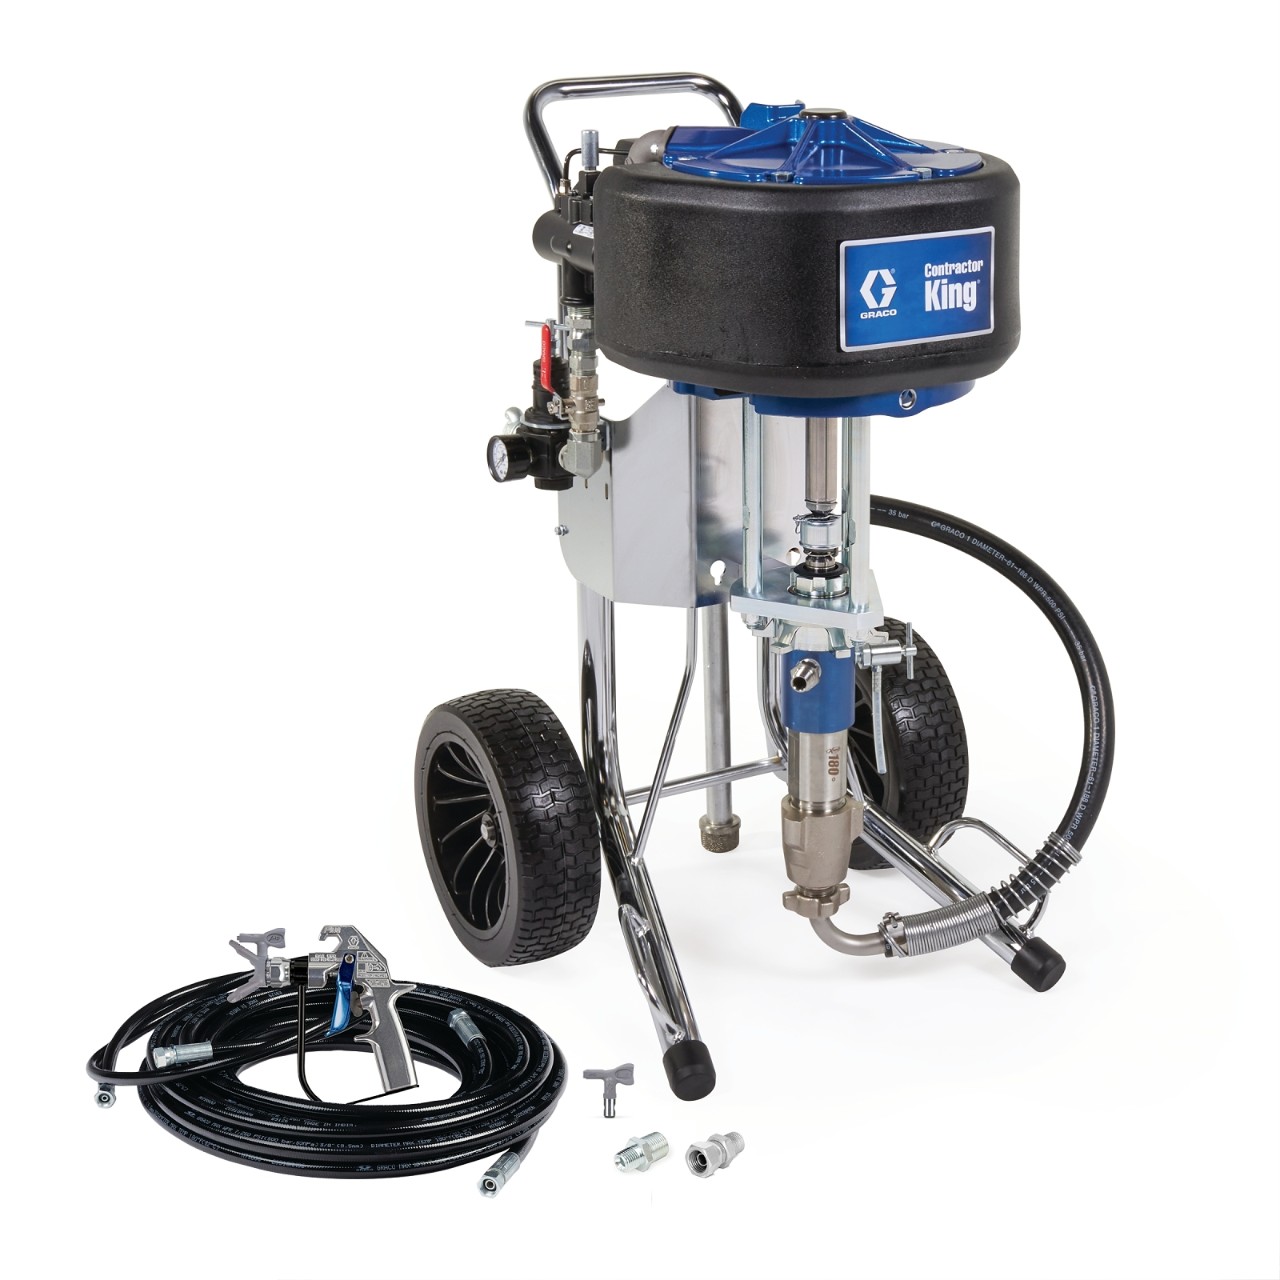 GRACO, 1/2 hp HP, 0.27 gpm Flow Rate, Airless Paint Sprayer - 21YR64